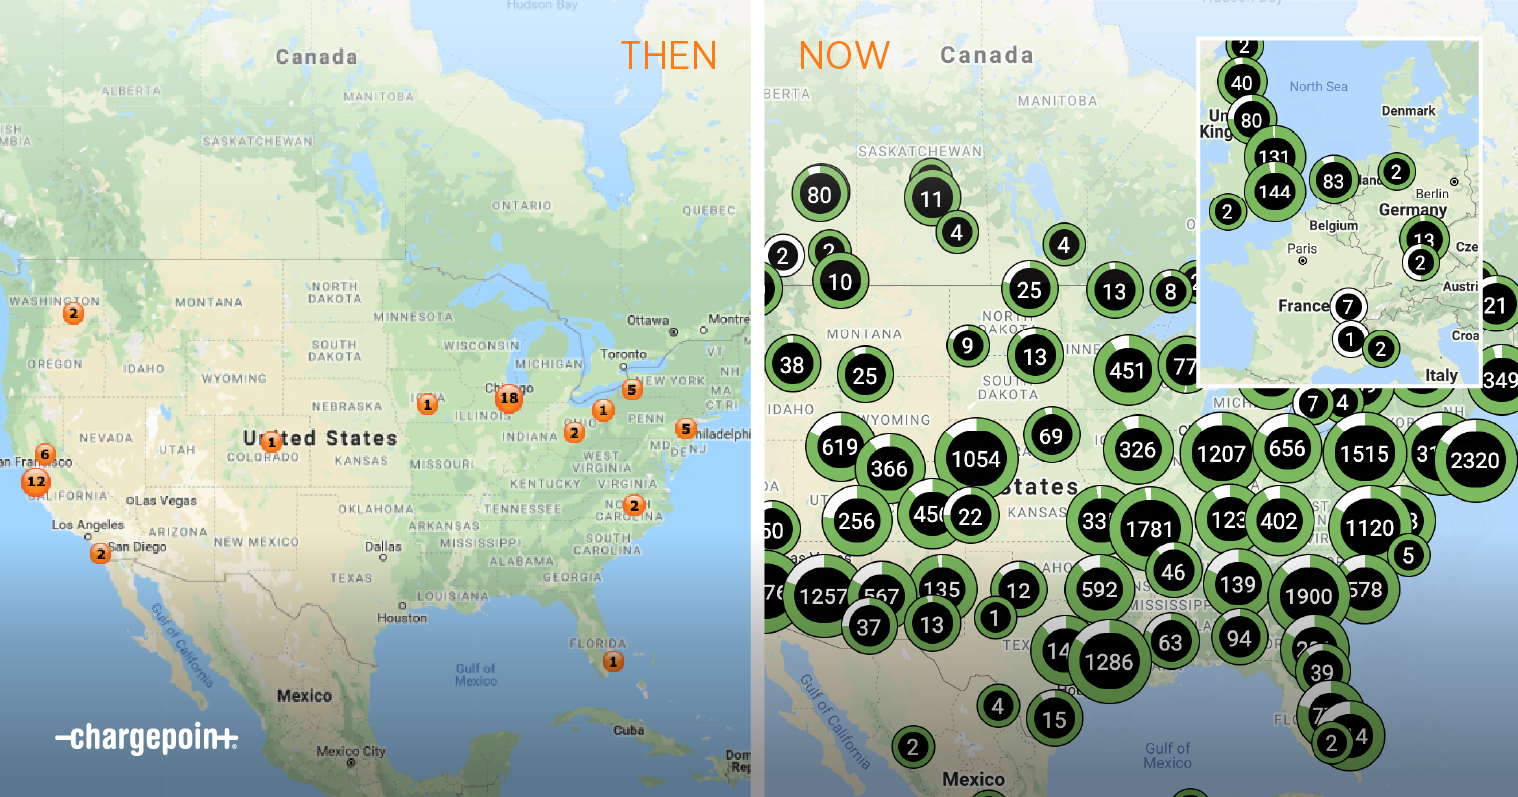 Then and Now: ChargePoint Network